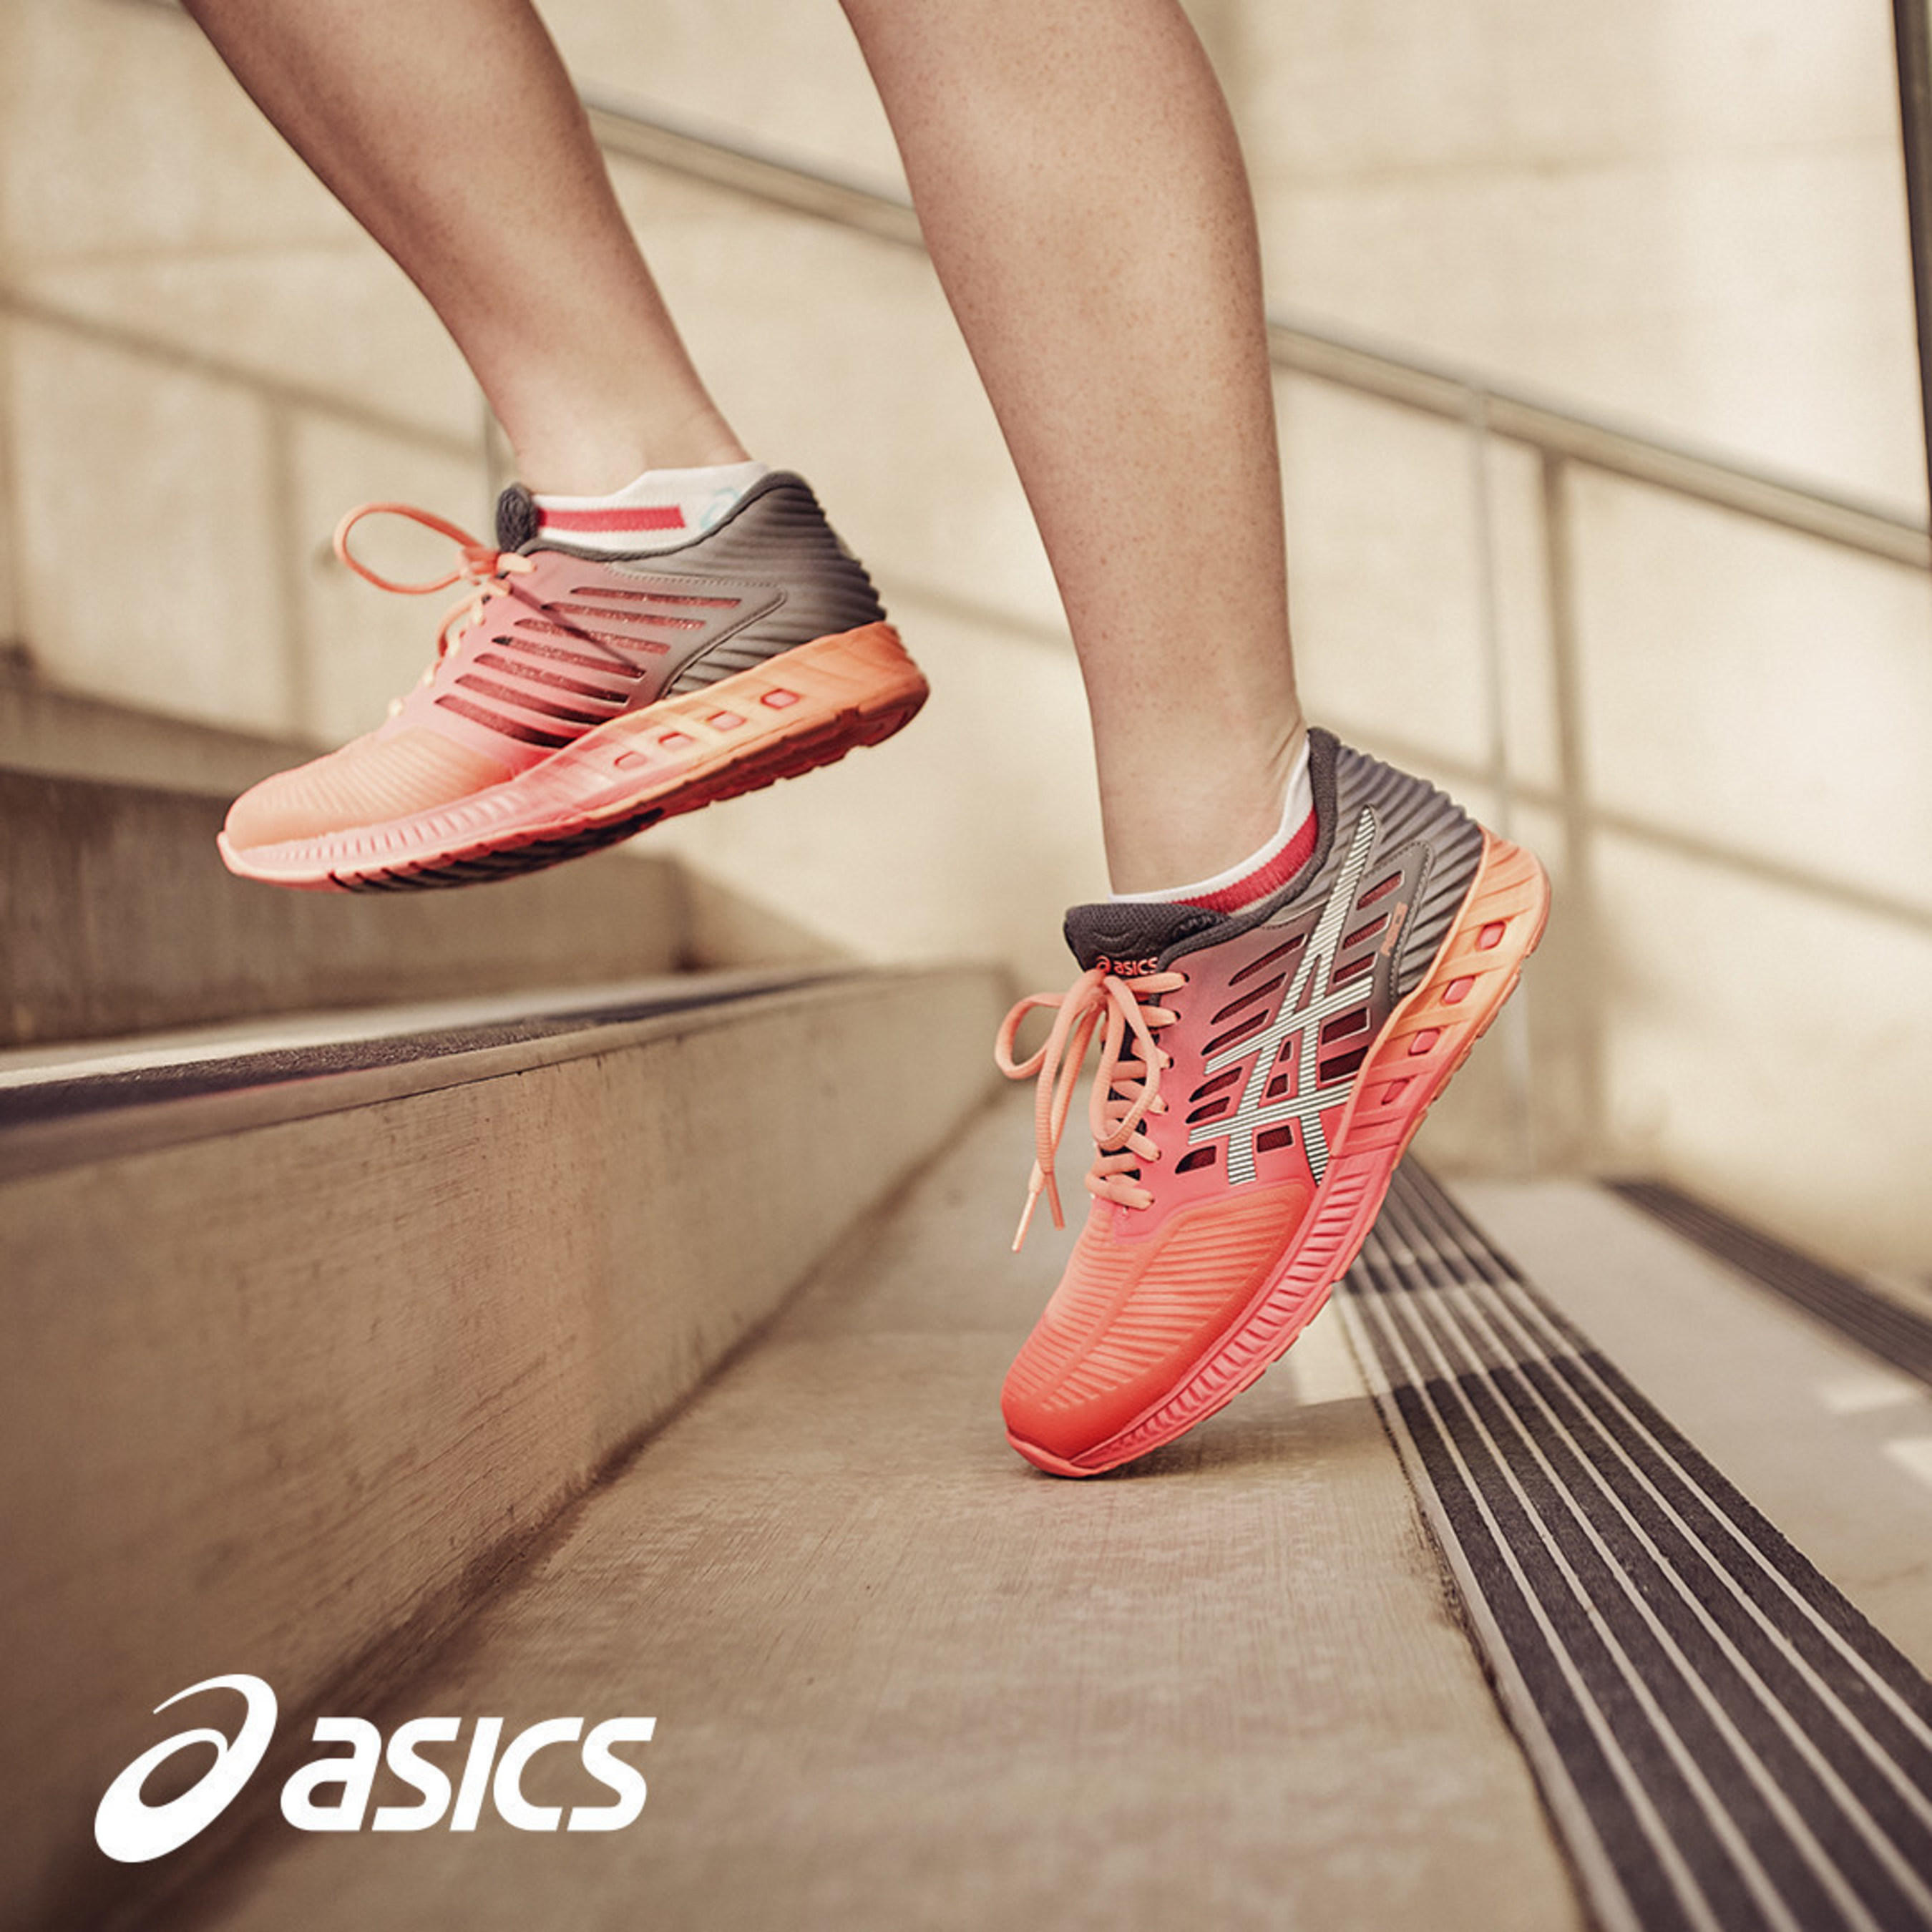 asics new collection